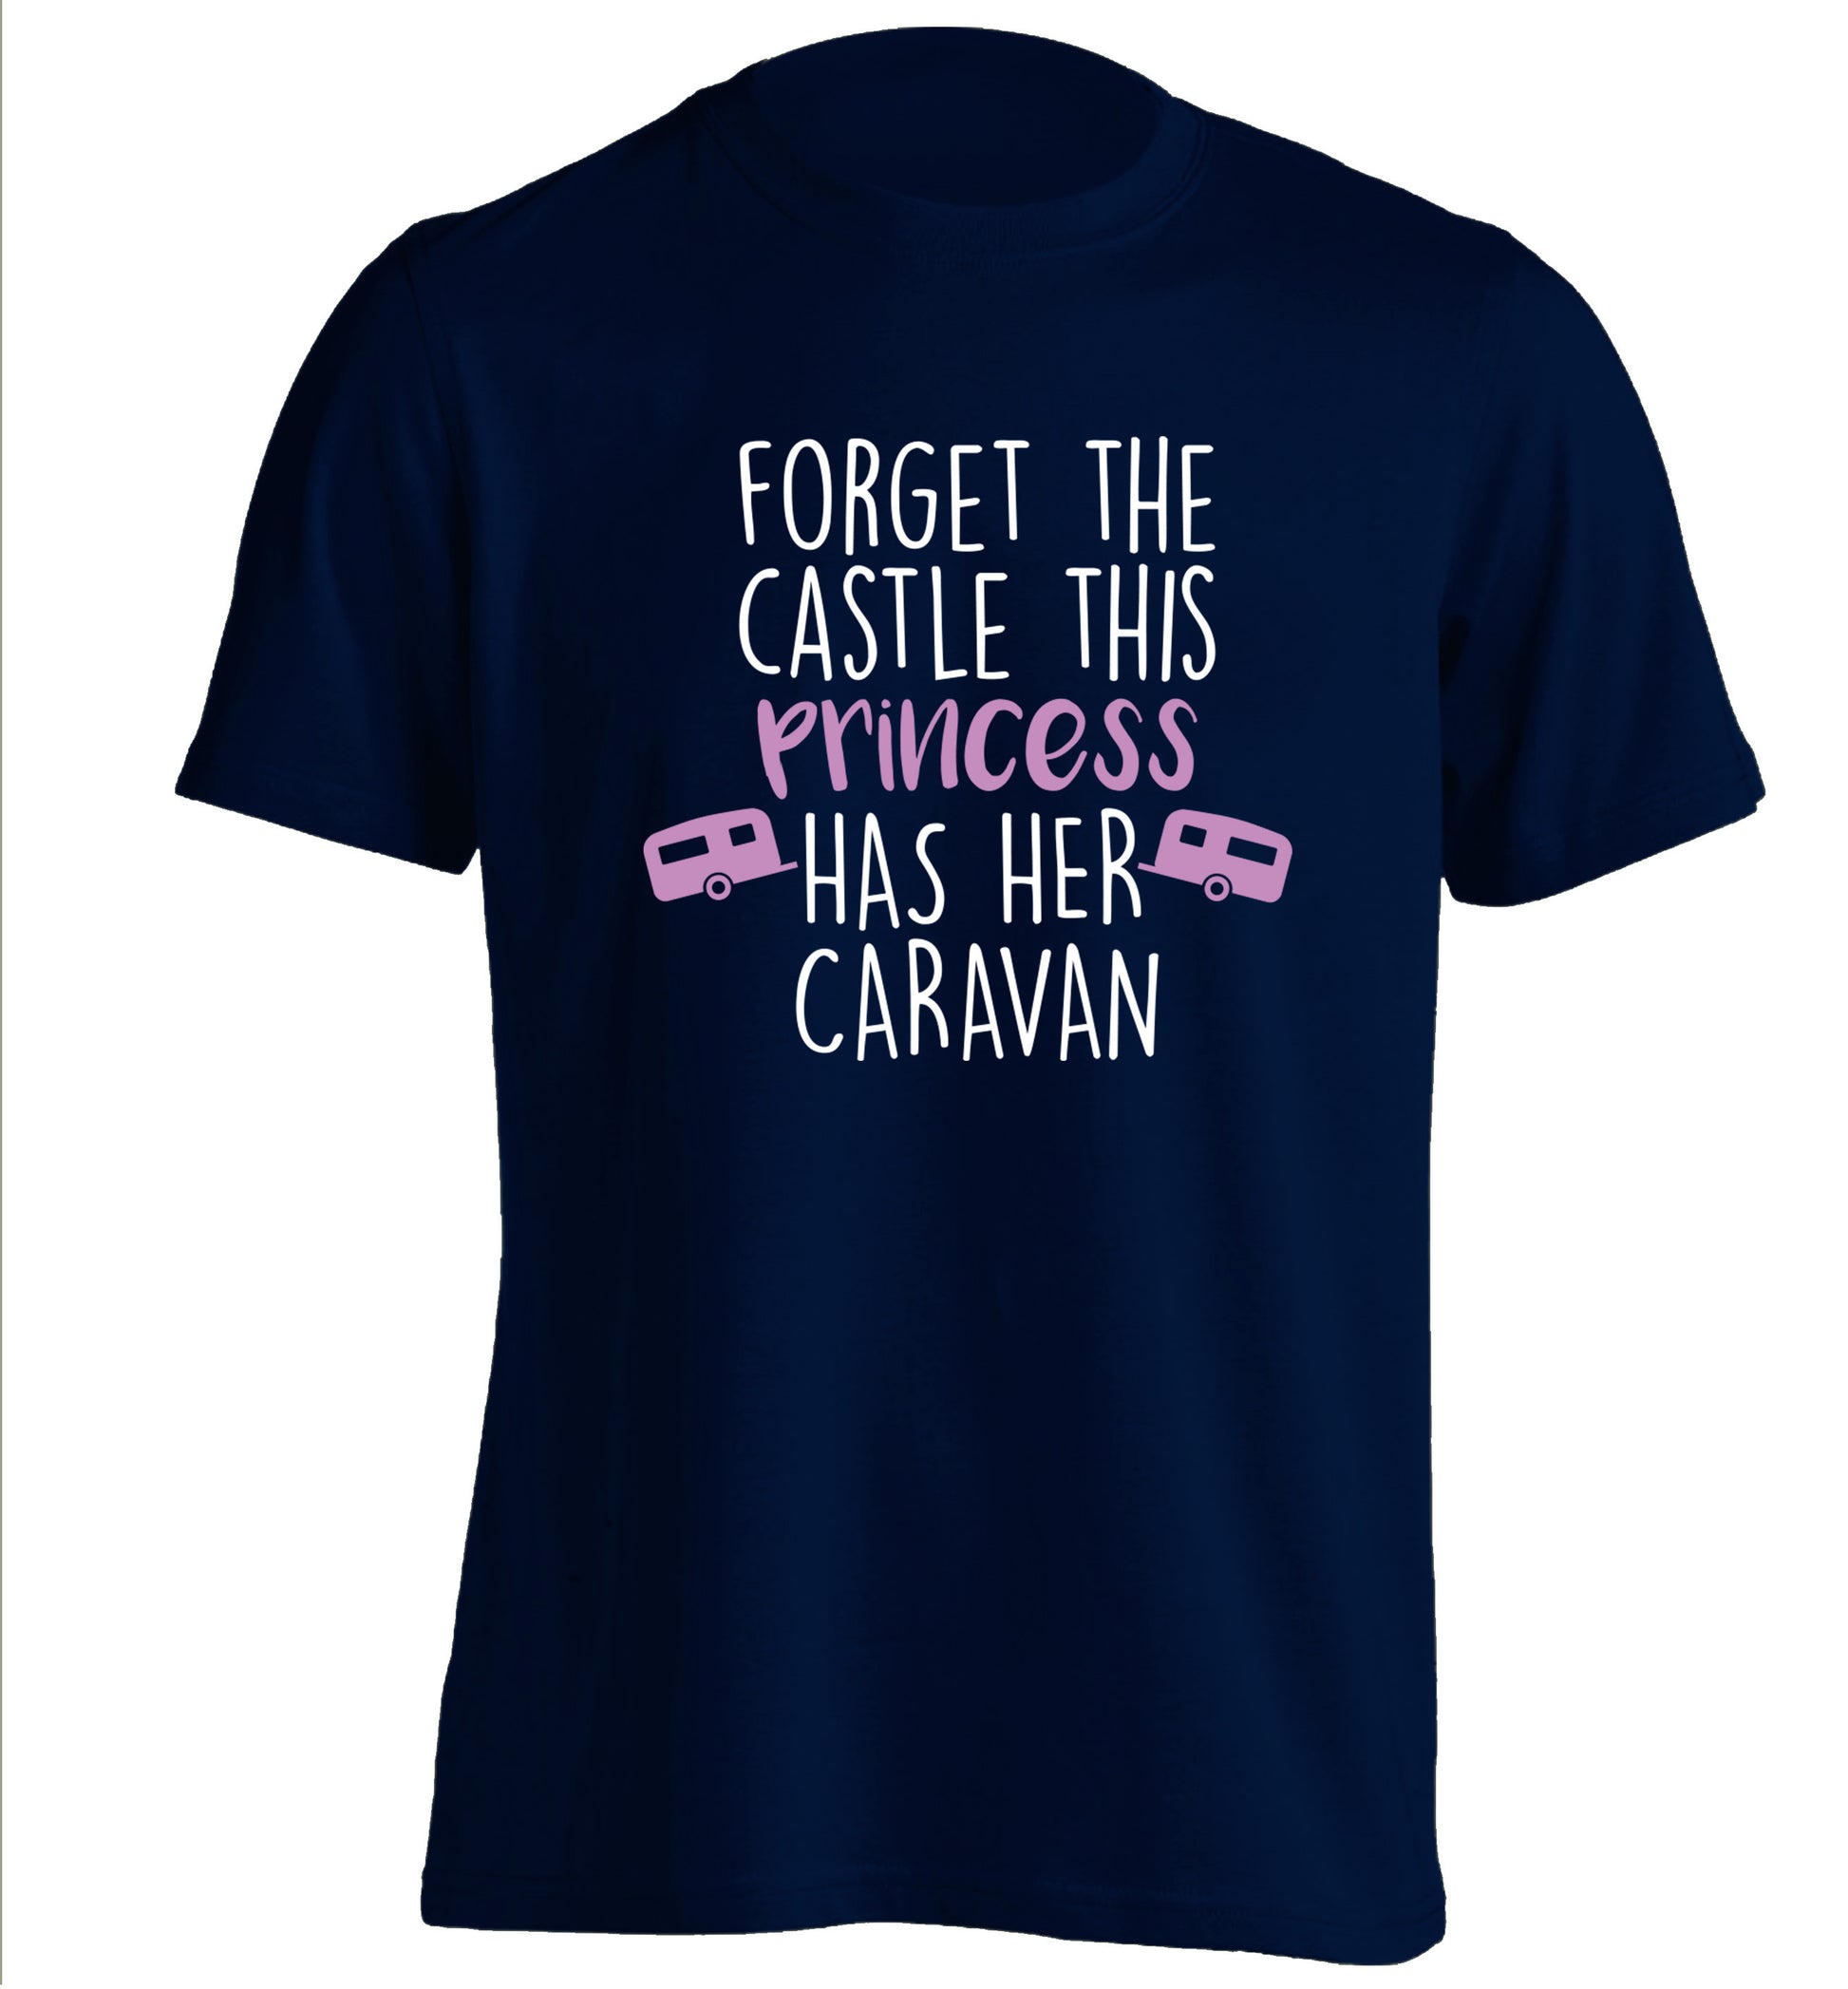 Forget the castle this princess lives at the caravan adults unisex navy Tshirt 2XL